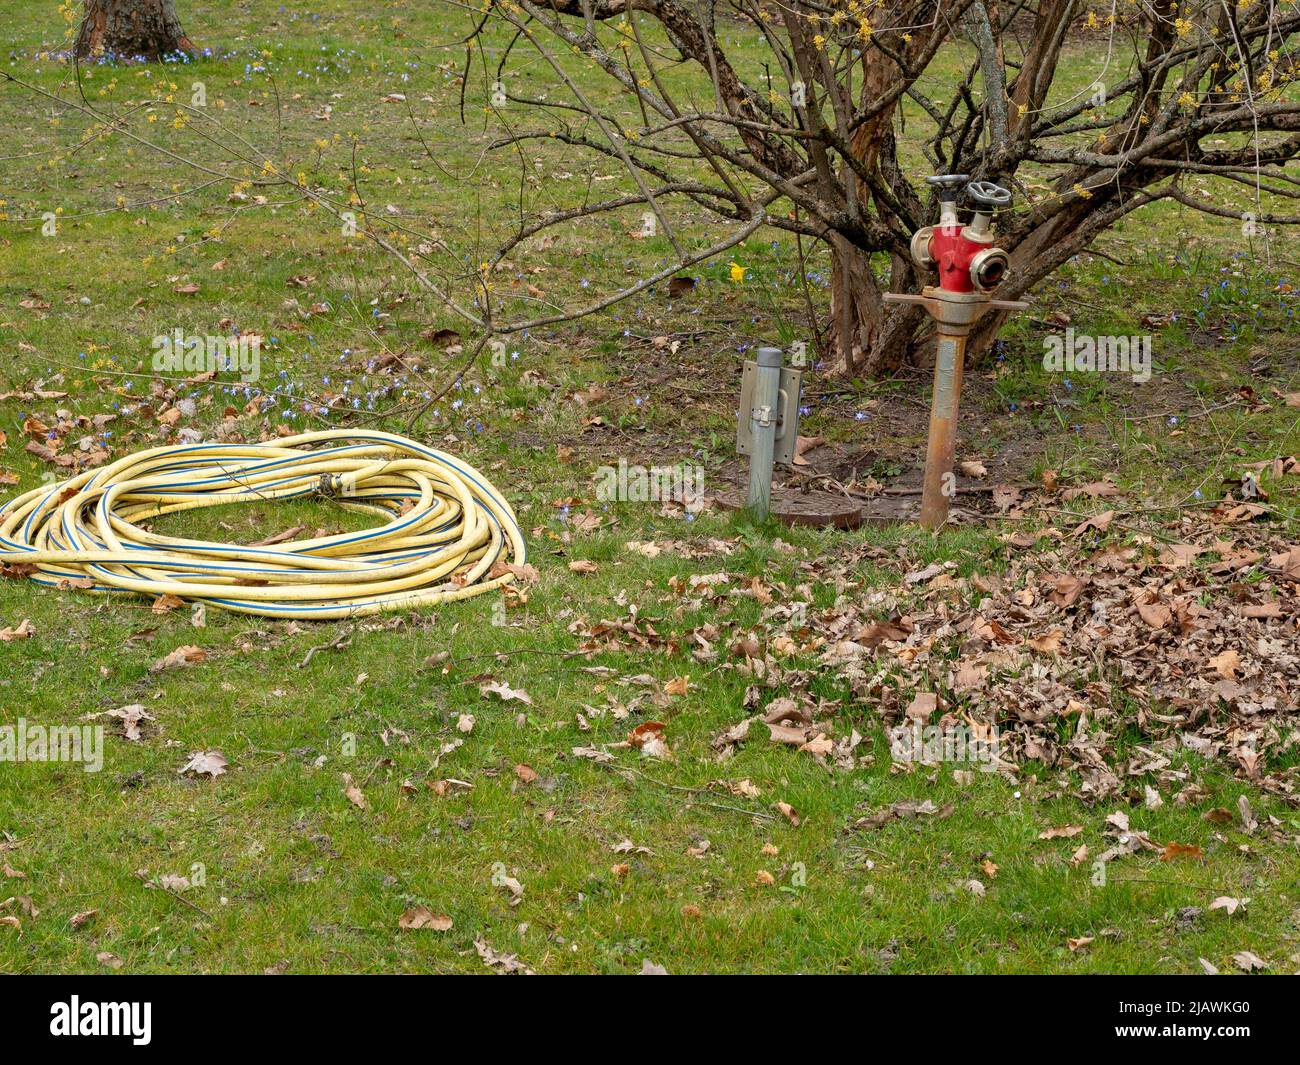 Irrigation system in the park. Irrigation system Stock Photo - Alamy